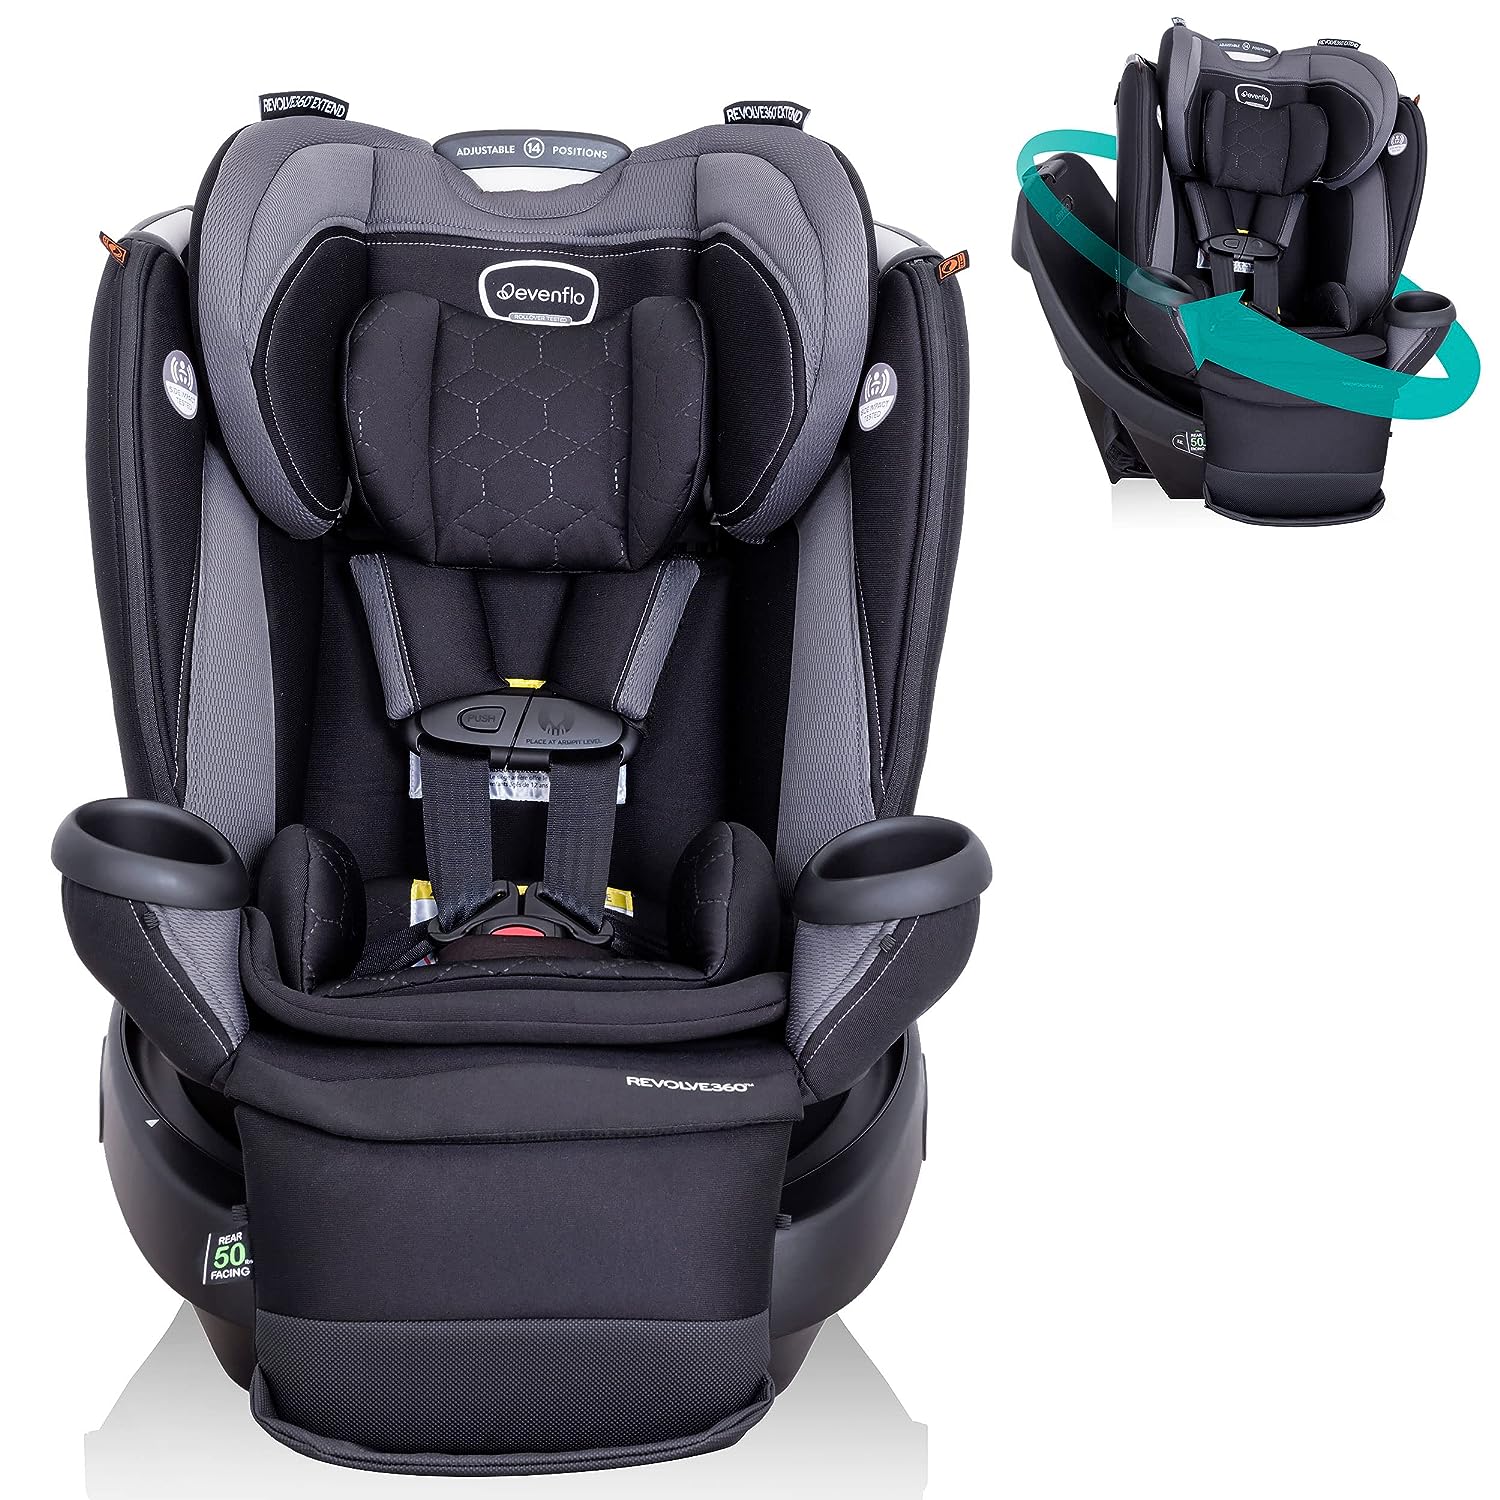 Amazon: Limited-time Deal: Evenflo Revolve360 Extend All-in-One Rotational Car Seat with Quick Clean Cover (Revere Gray) - $223.99